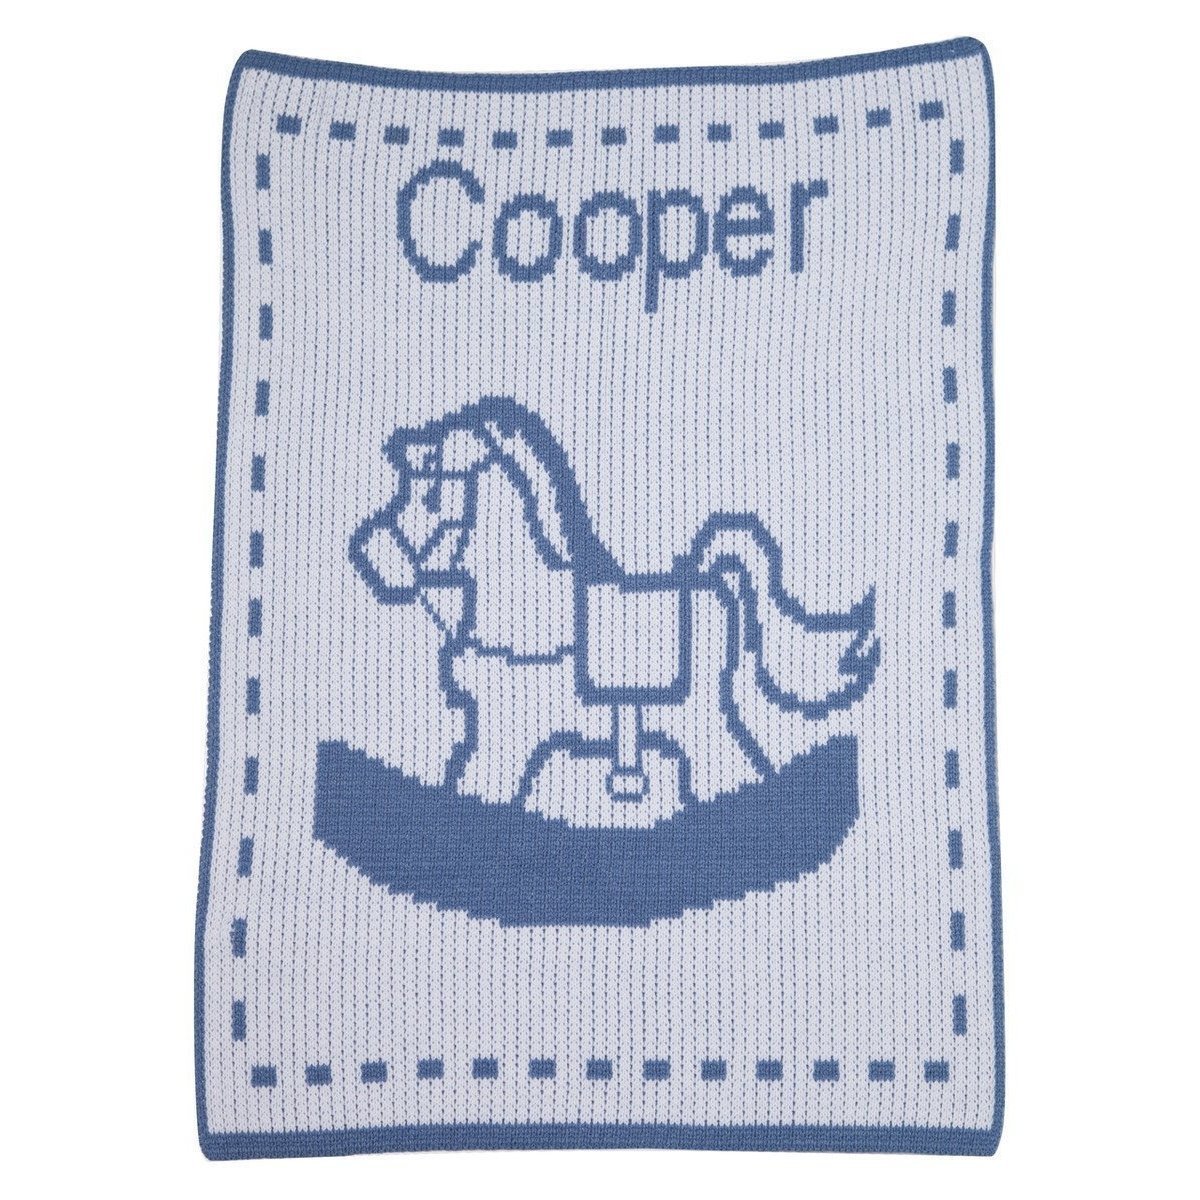 Single Rocking Horse Personalized Stroller Blanket or Baby Blanket-Baby Blanket-Jack and Jill Boutique